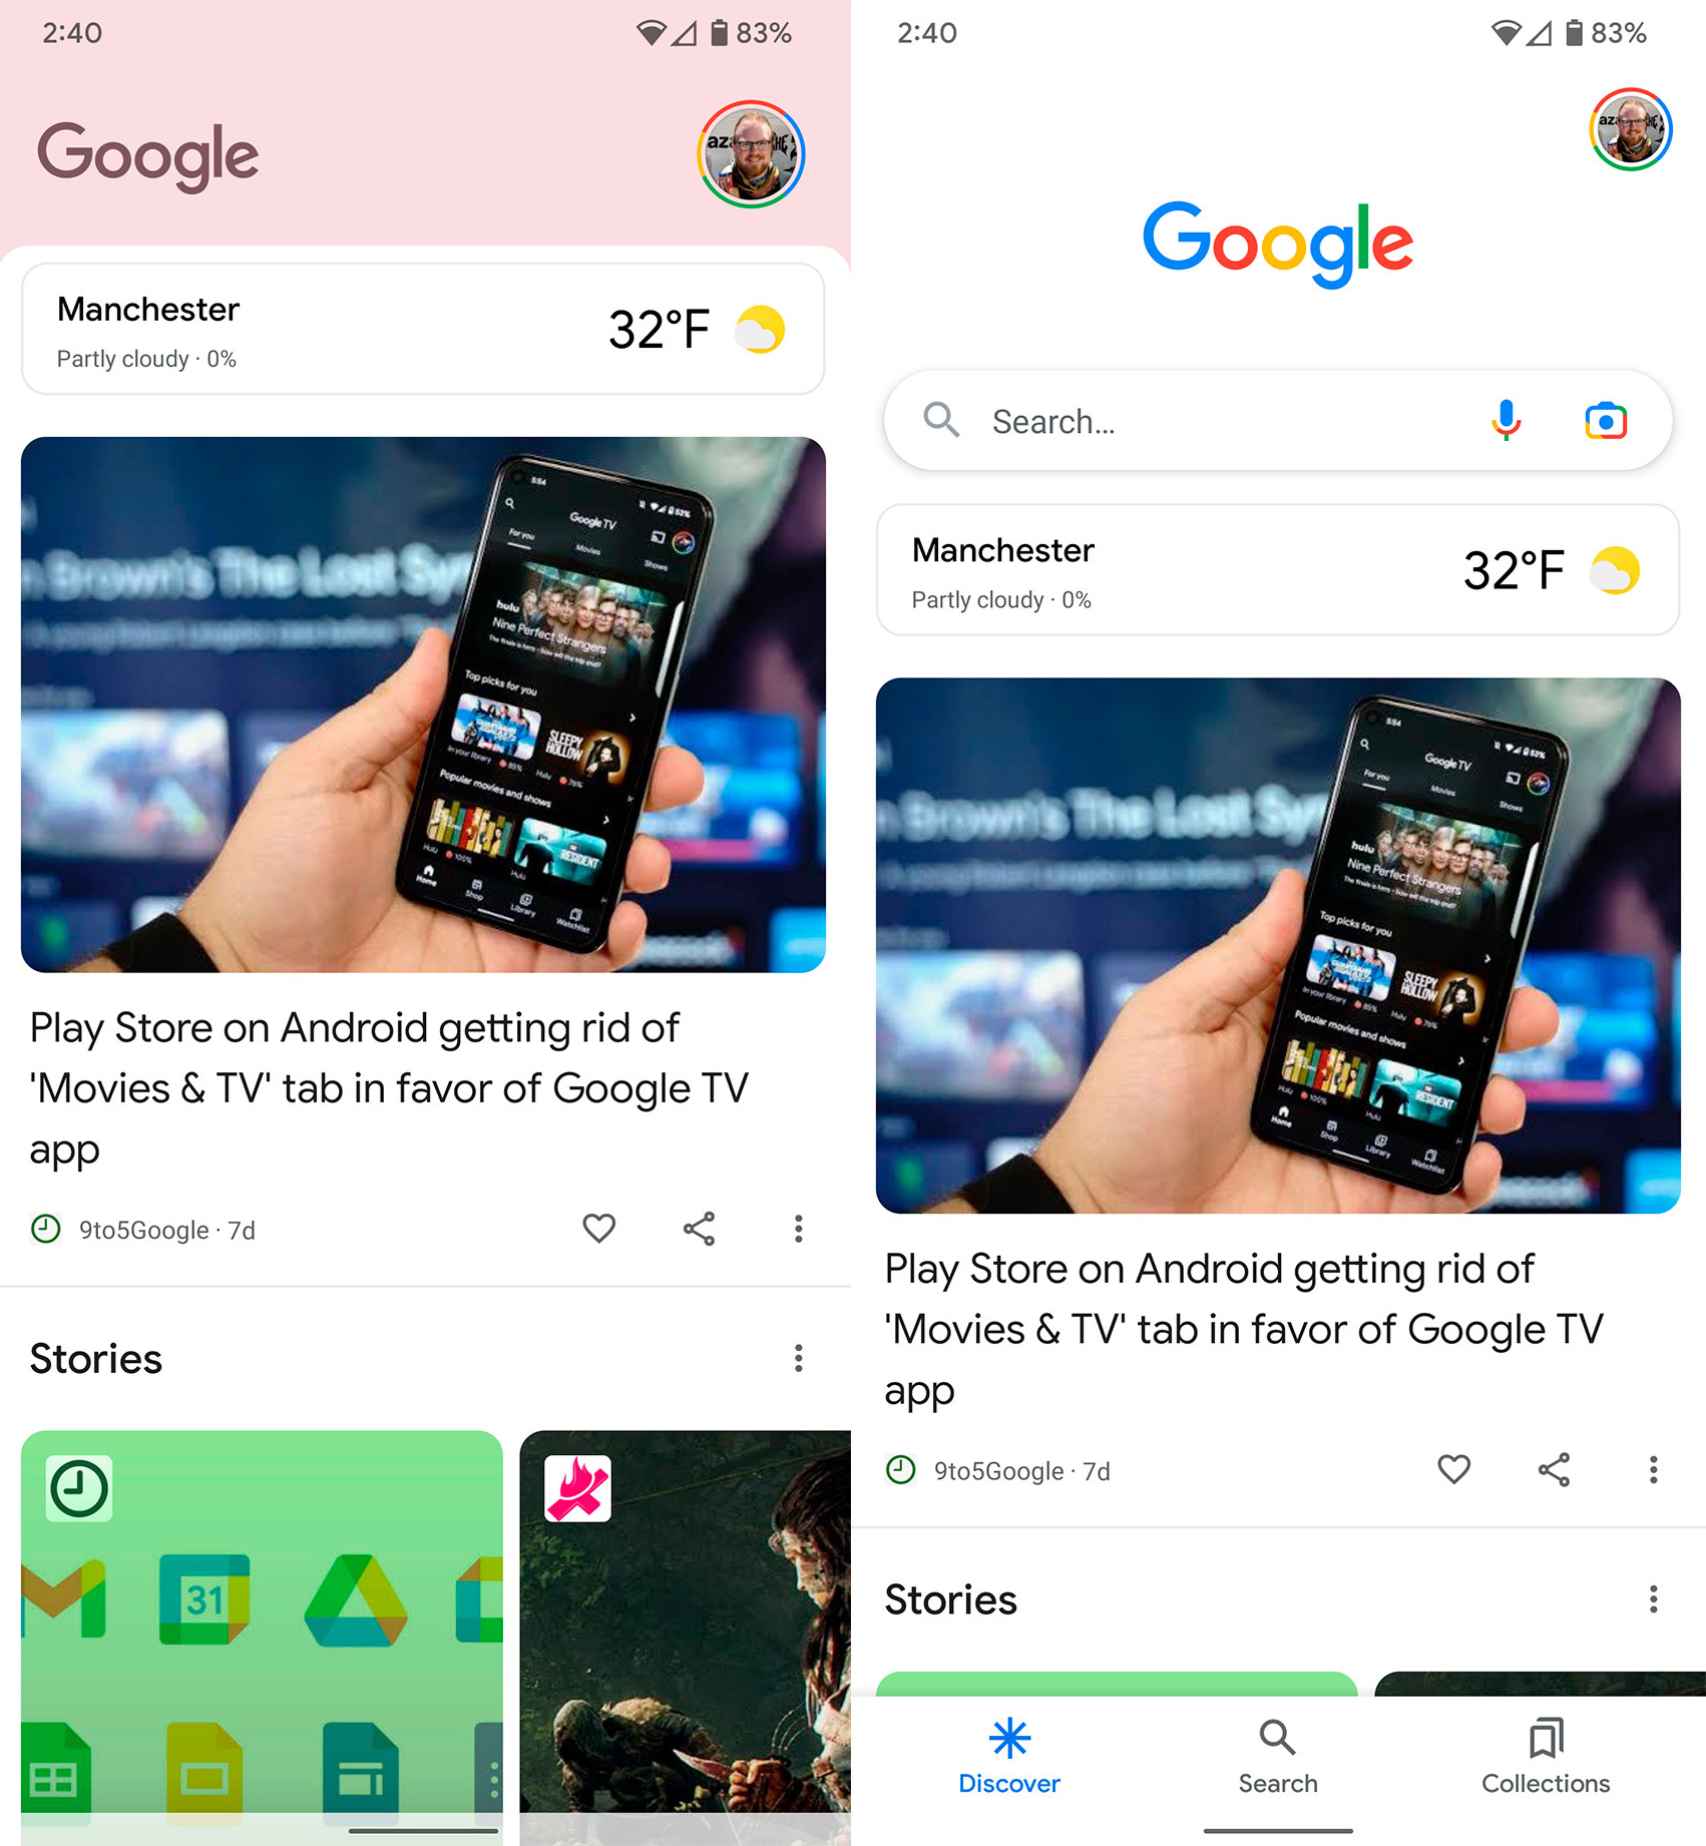 Google Discover is updated by putting weather information at the top of the feed